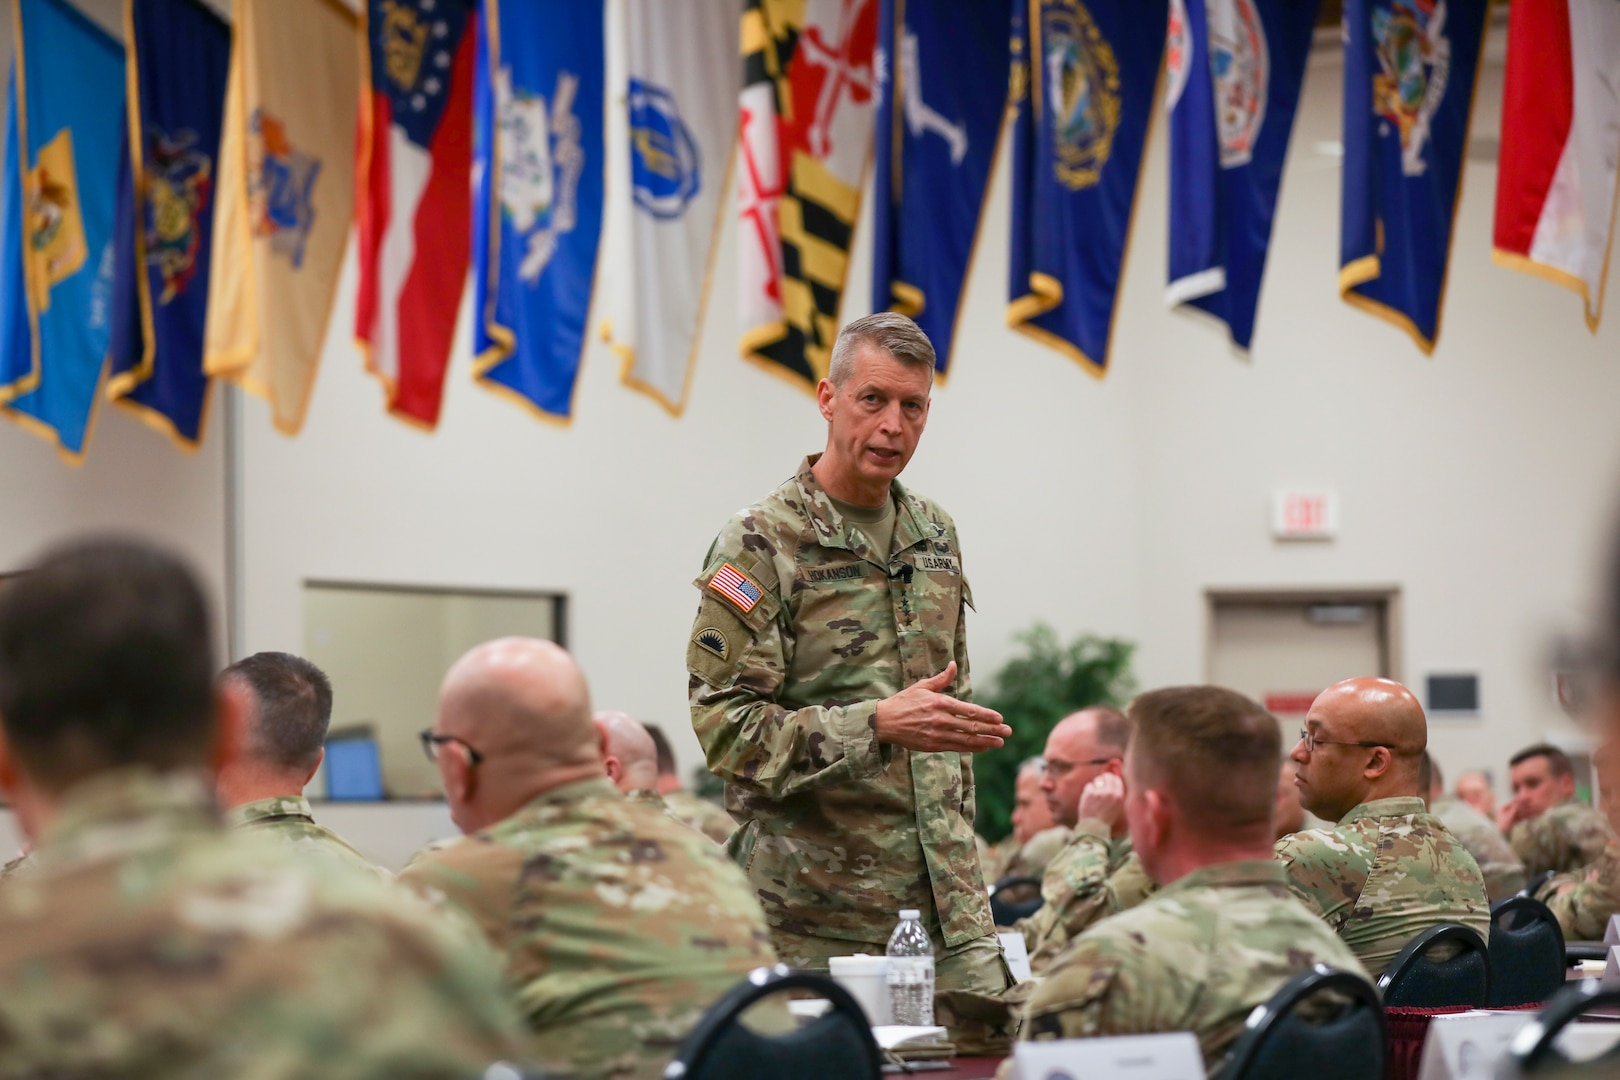 Army Gen. Daniel Hokanson, chief, National Guard Bureau, addresses senior Guard leaders from across the country during the director of the Army National Guard’s Green Tab Commanders Conference at the National Guard Professional Education Center, Camp Robinson, Arkansas, Jan. 11, 2023. Hokanson emphasized the Guard is an integral part of the Defense Department’s National Defense Strategy.